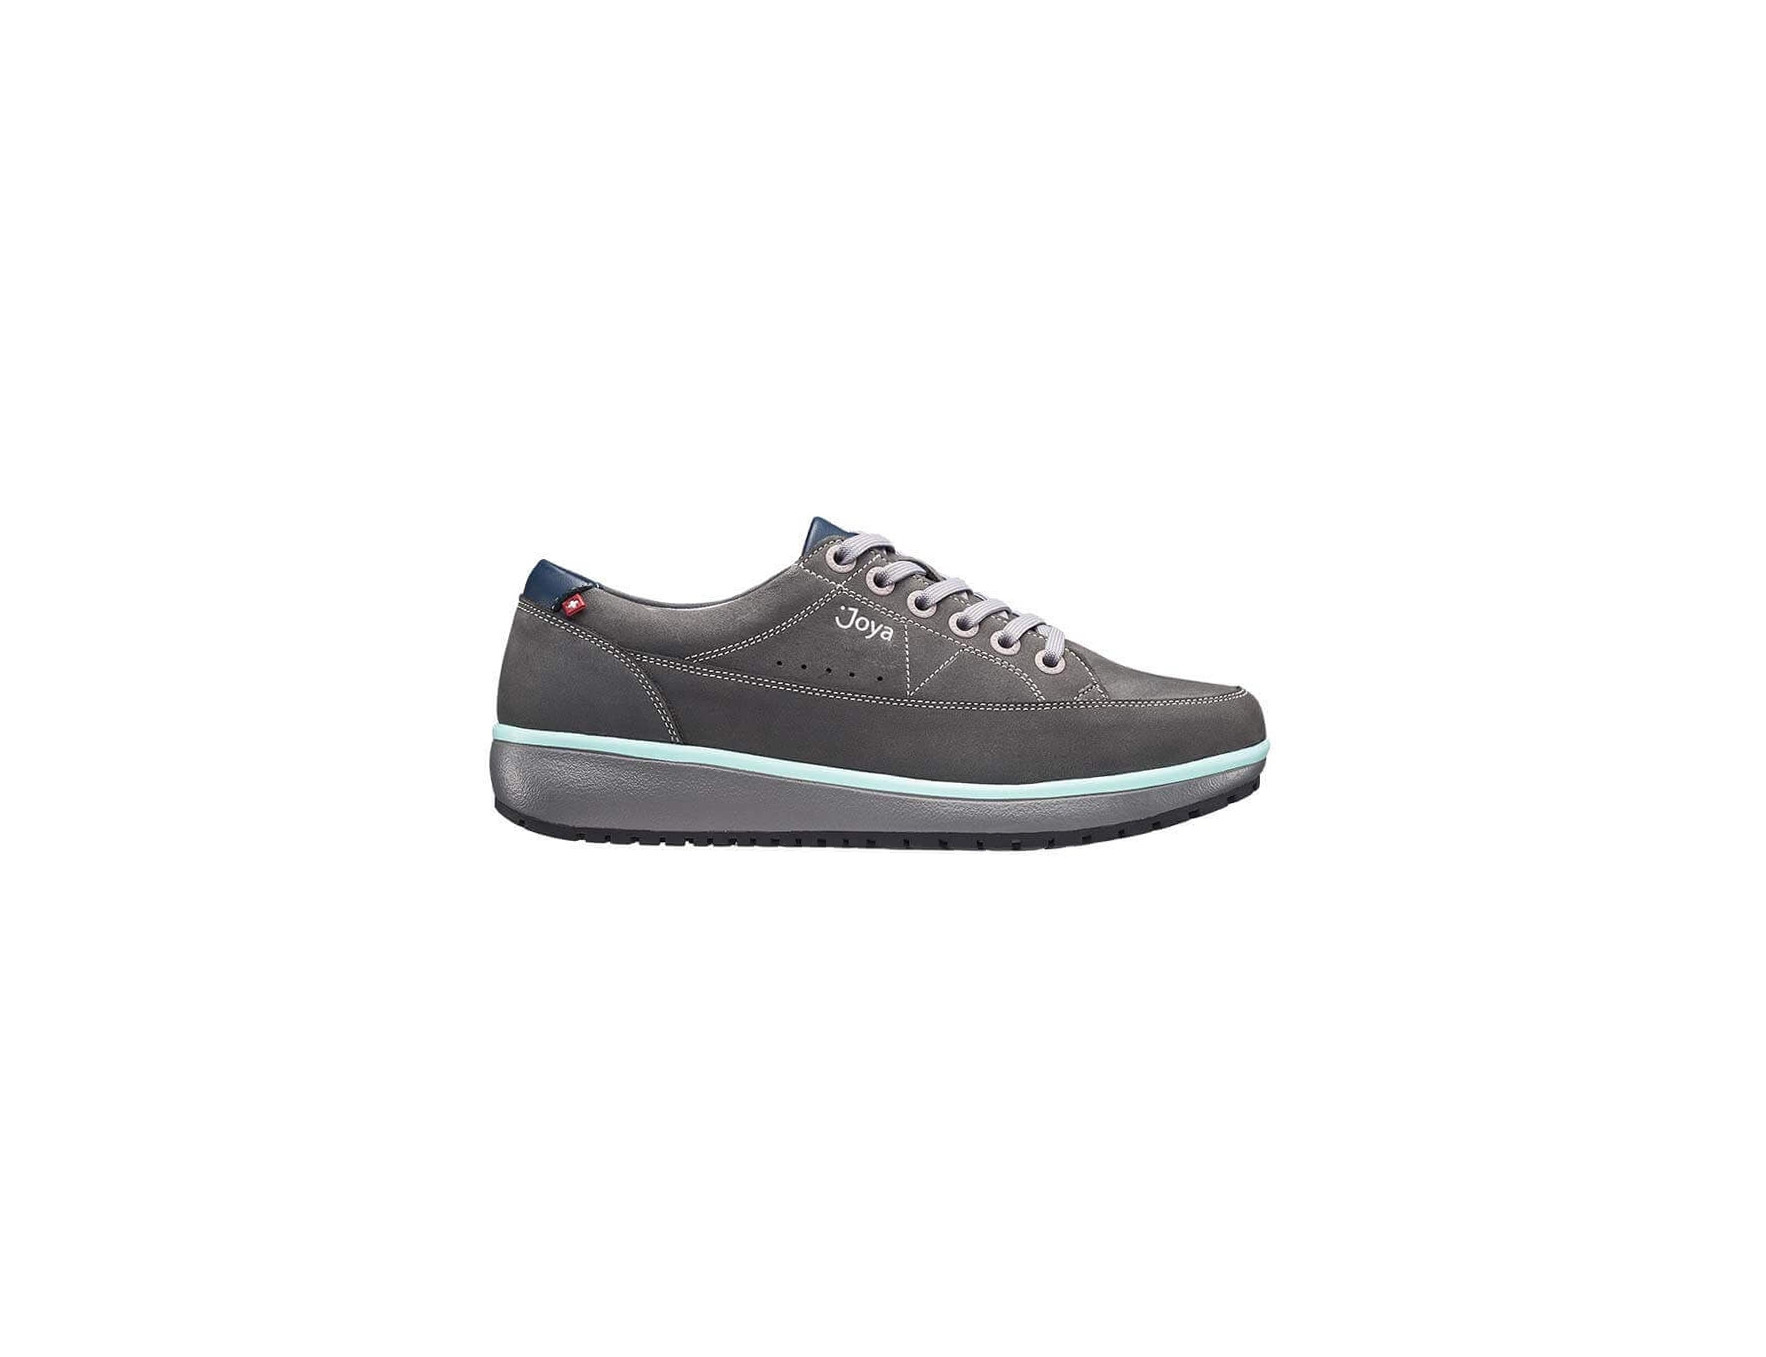 Womens Joya Vancouver – Grey Casual Shoes – Lace-Up – Suitable For Orthotics / Heel Spurs – Size 6.5 – Leather / Synthetic Fabric